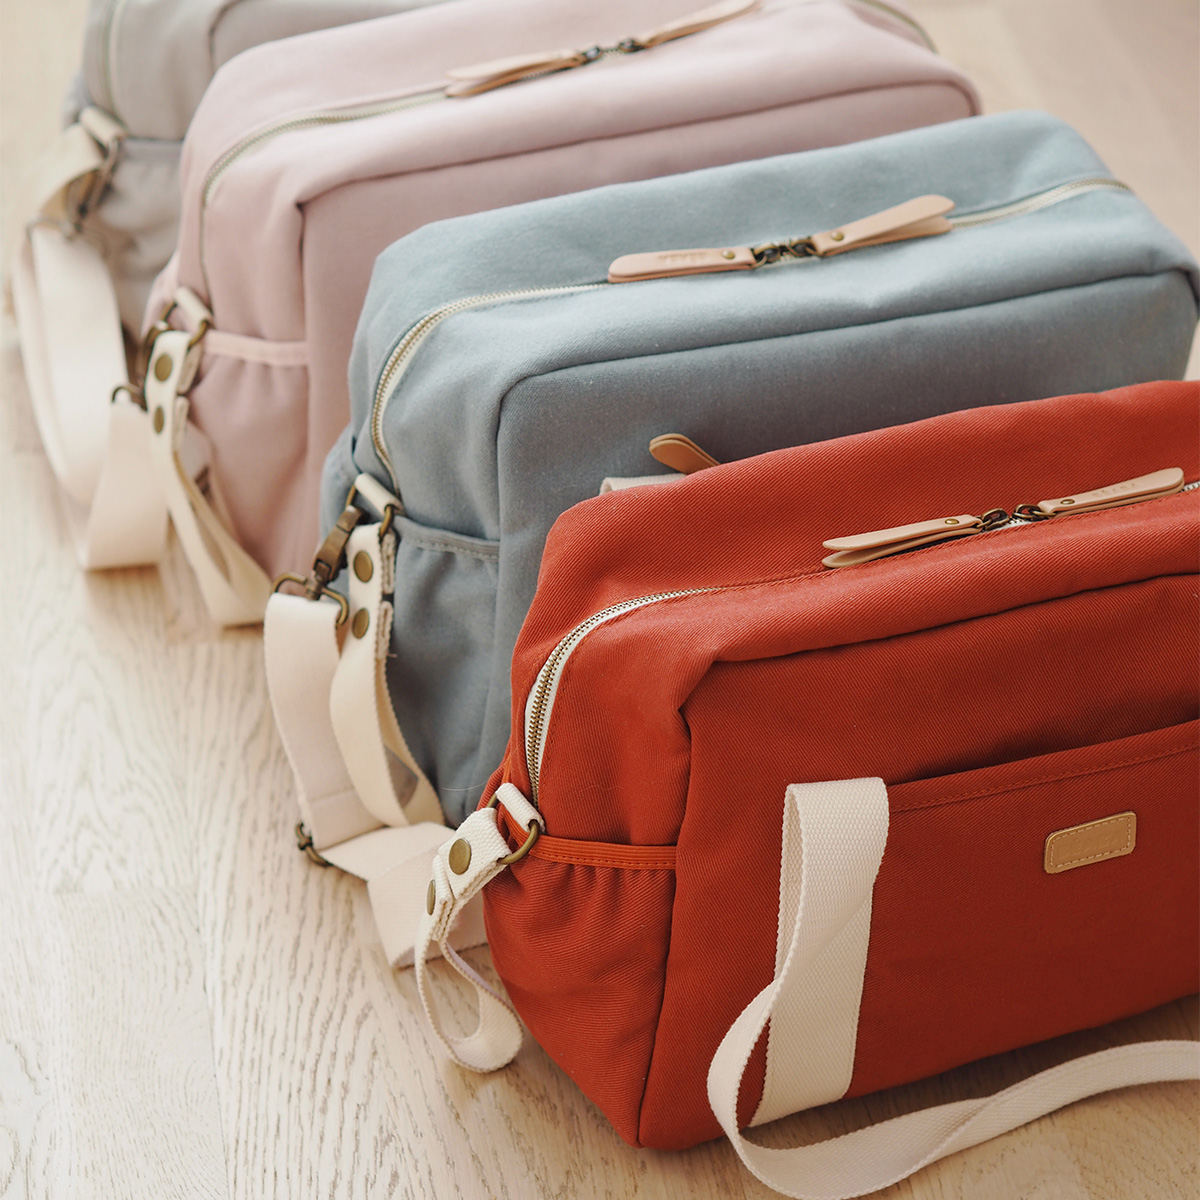 paris diaper bag collection in colors brick, sage, dusty pink and pearl grey